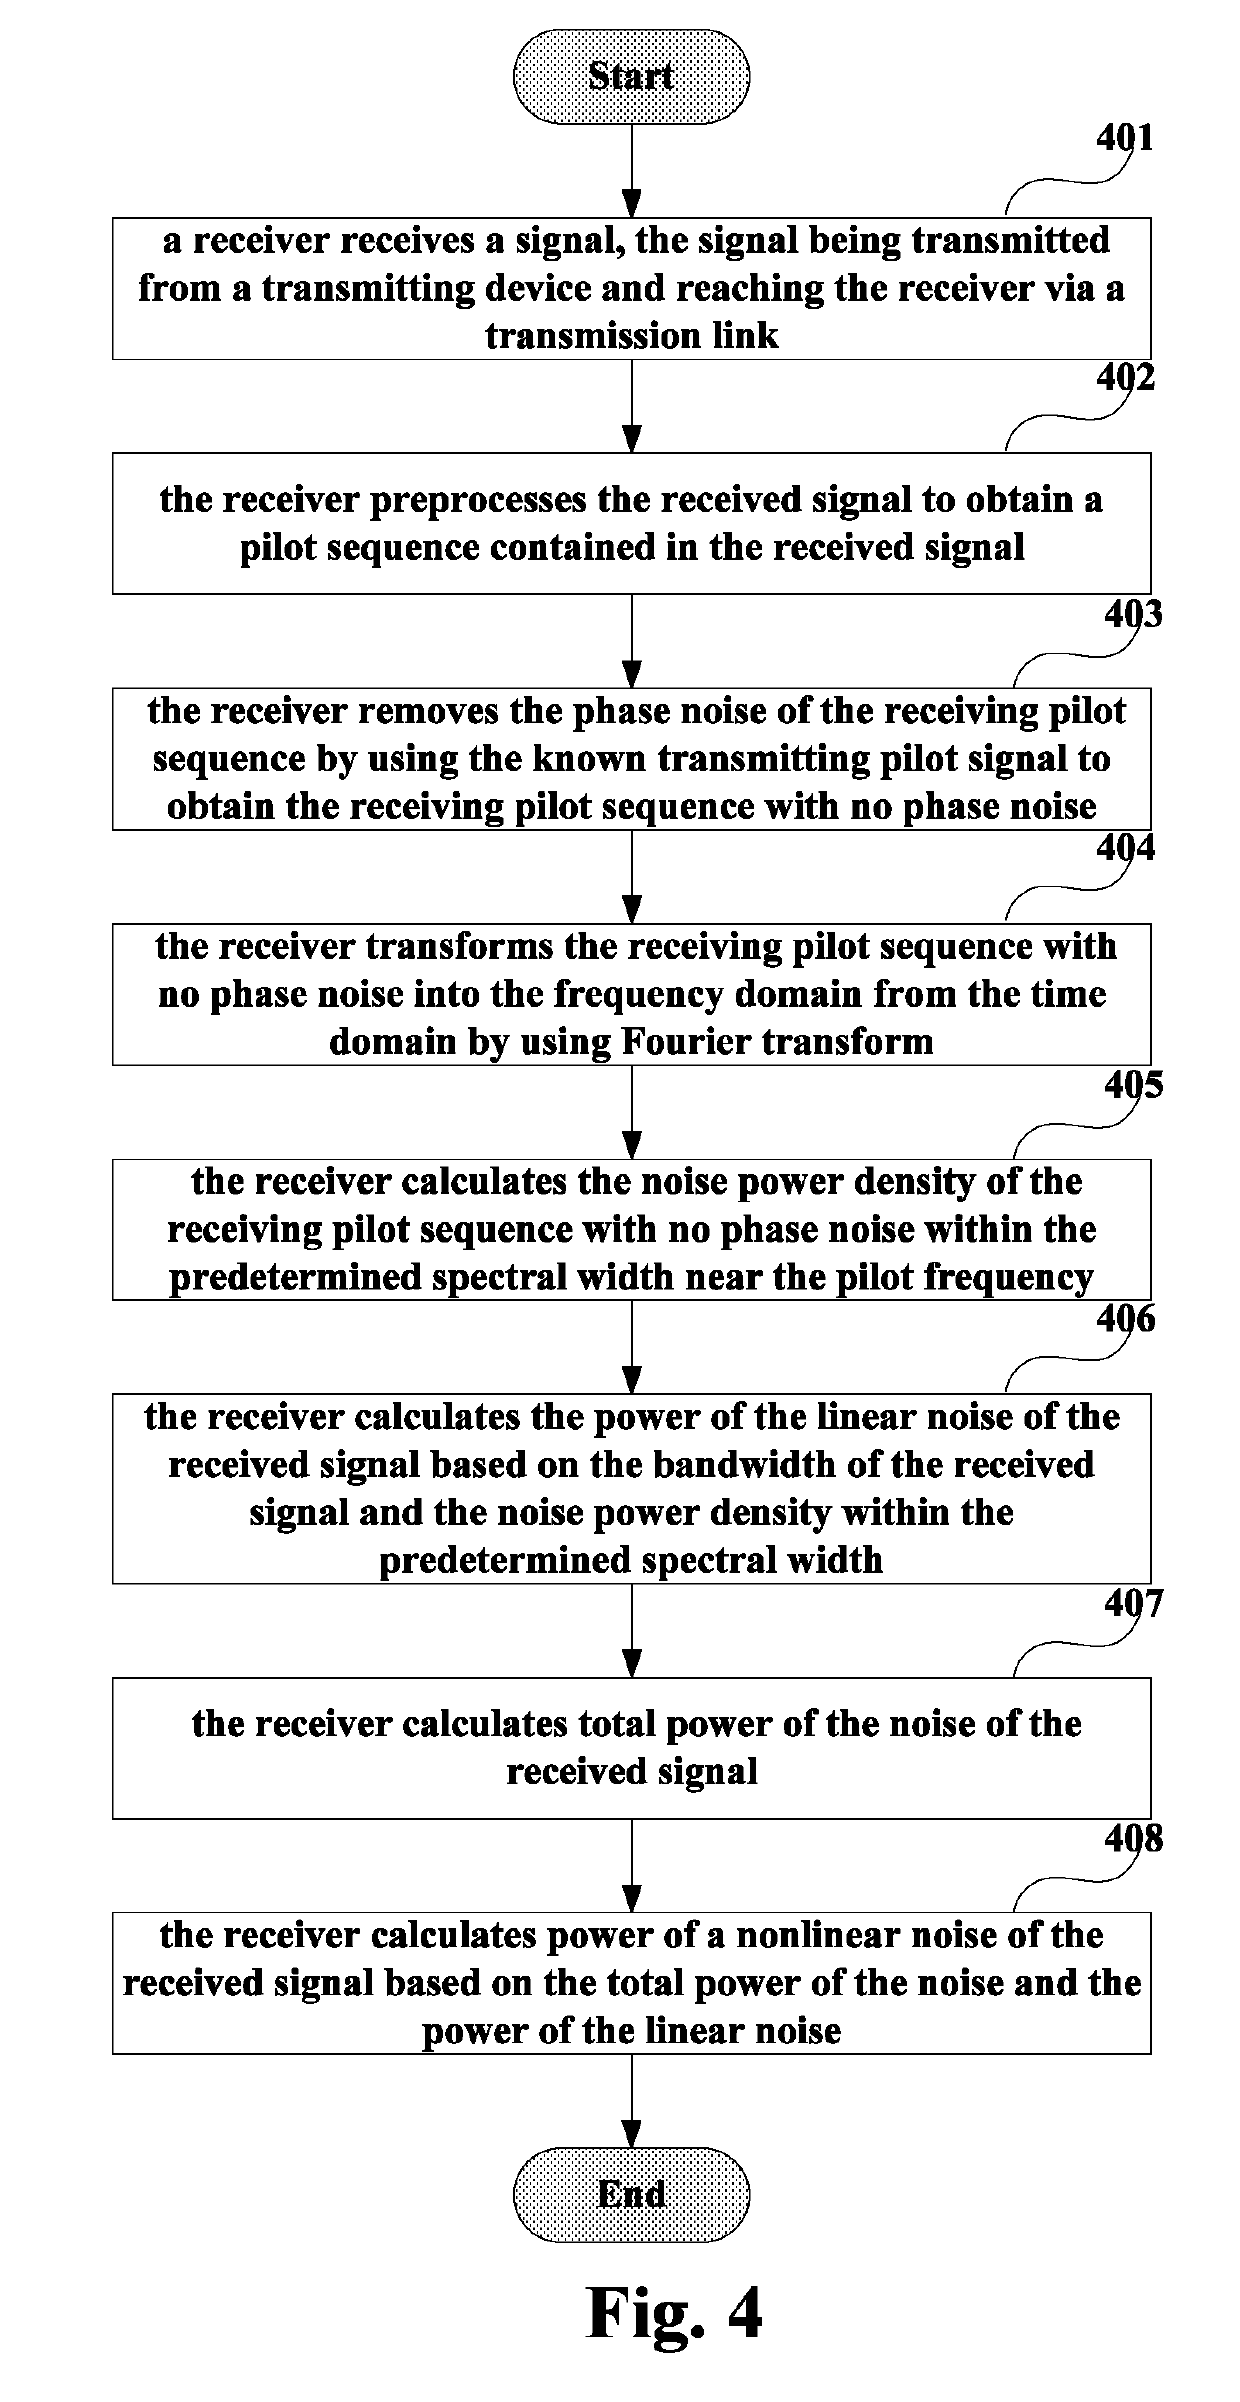 Detection apparatus and method for noise intensity and coherent optical receiver